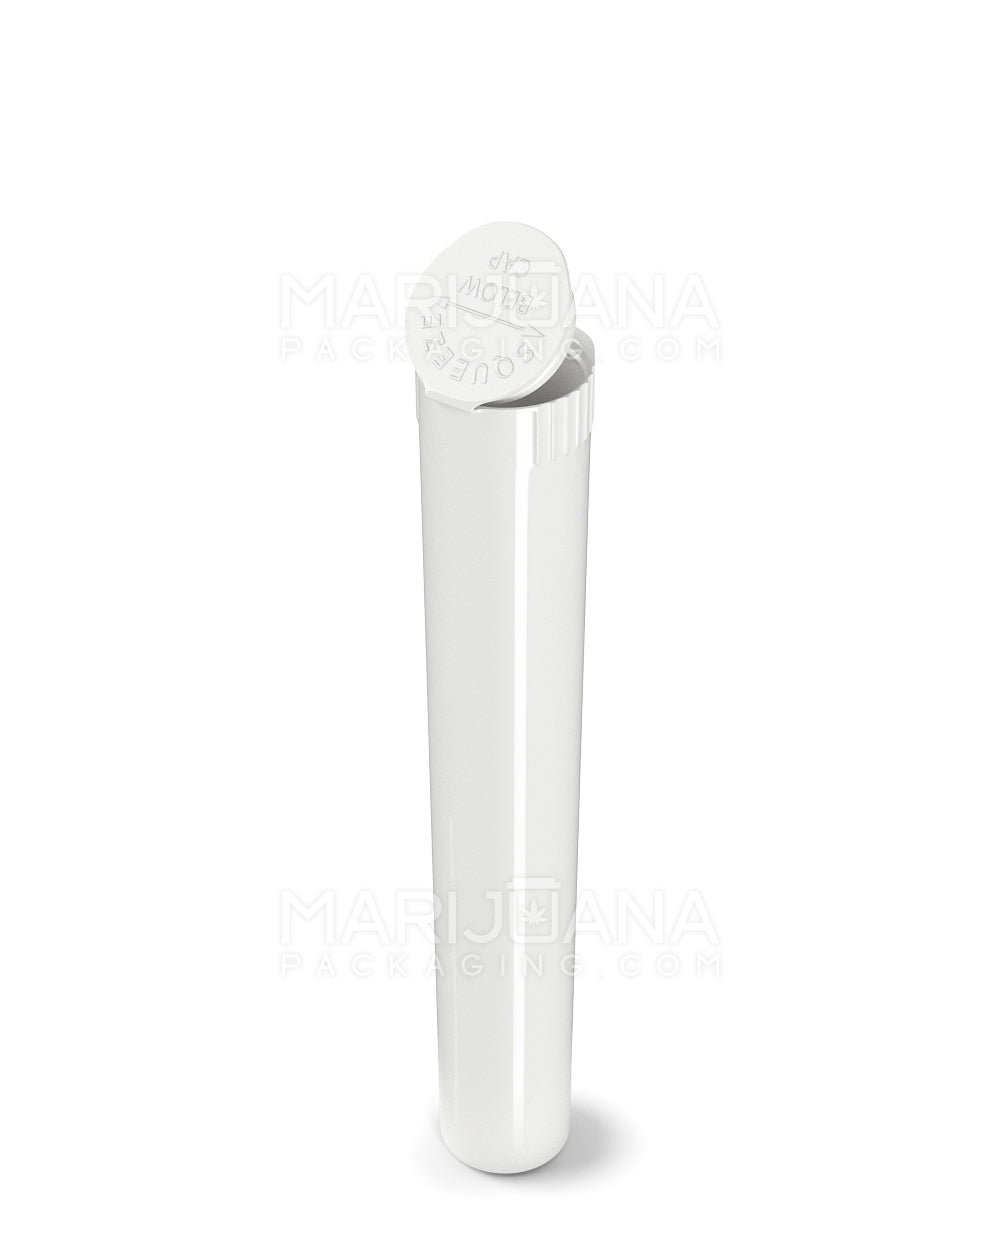 Child Resistant | King Size Pop Top Opaque Plastic Pre-Roll Tubes | 116mm - White - 1000 Count - 3